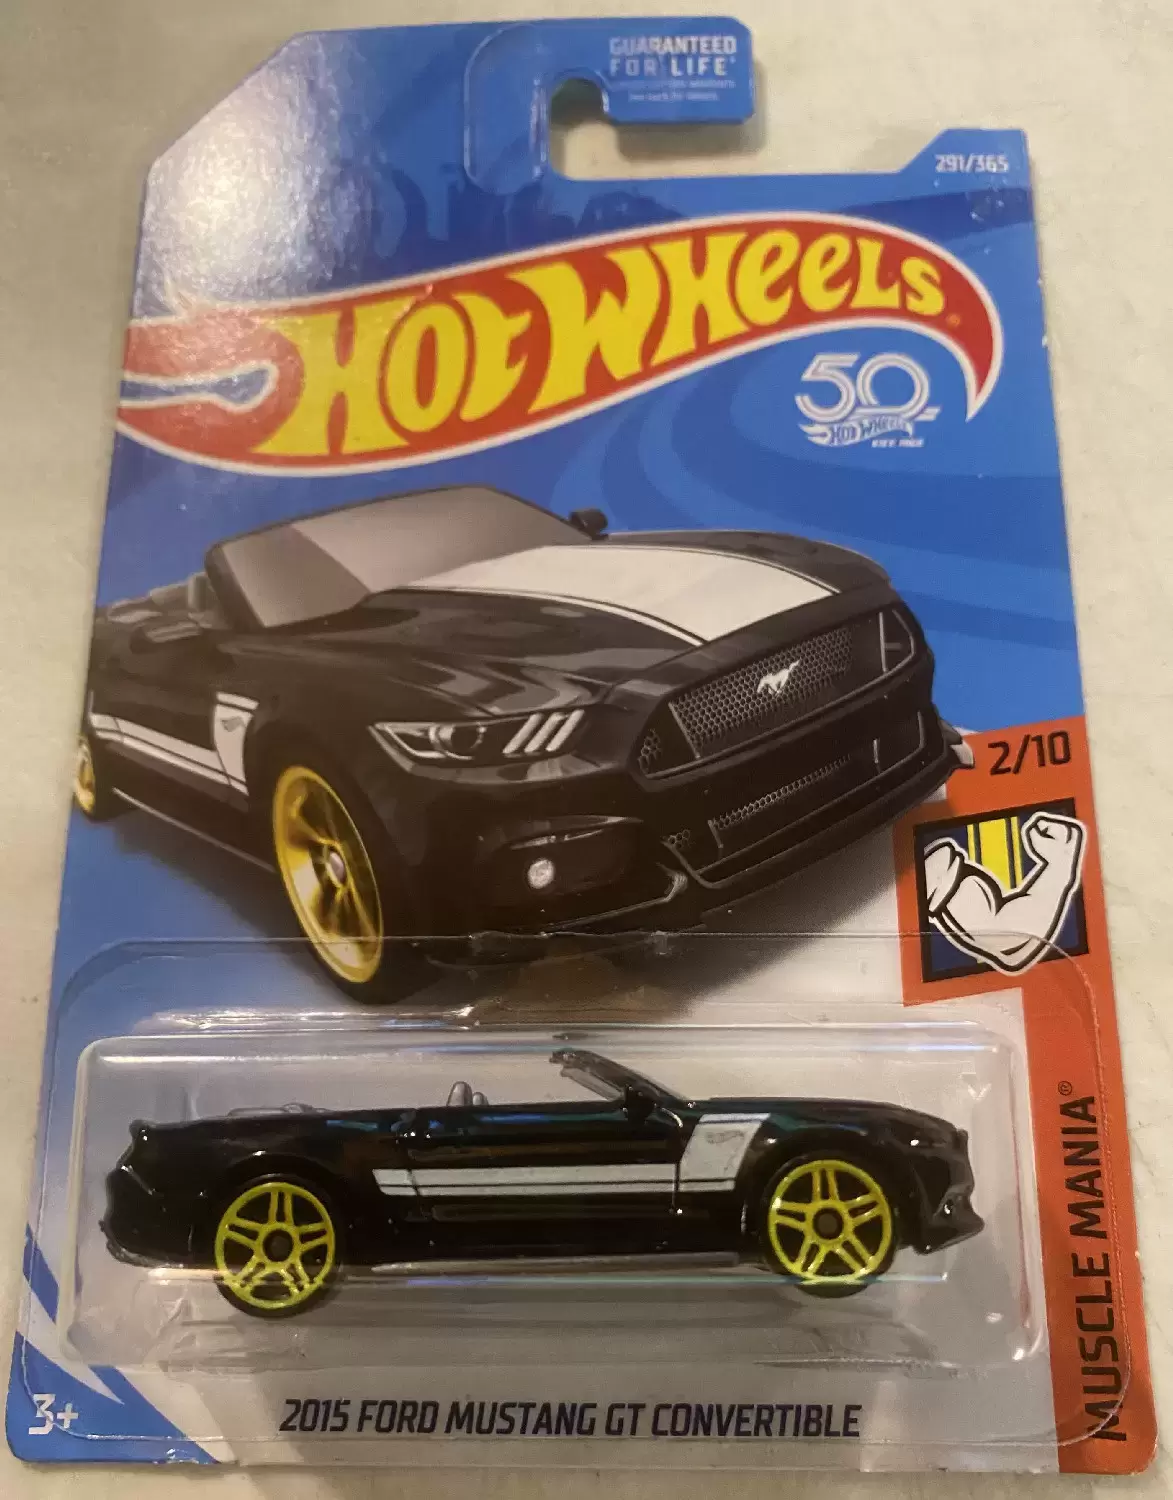 Hot Wheels Classiques - 2015 Ford Mustang GT Convertible (291/365) - Muscle Mania 2/10